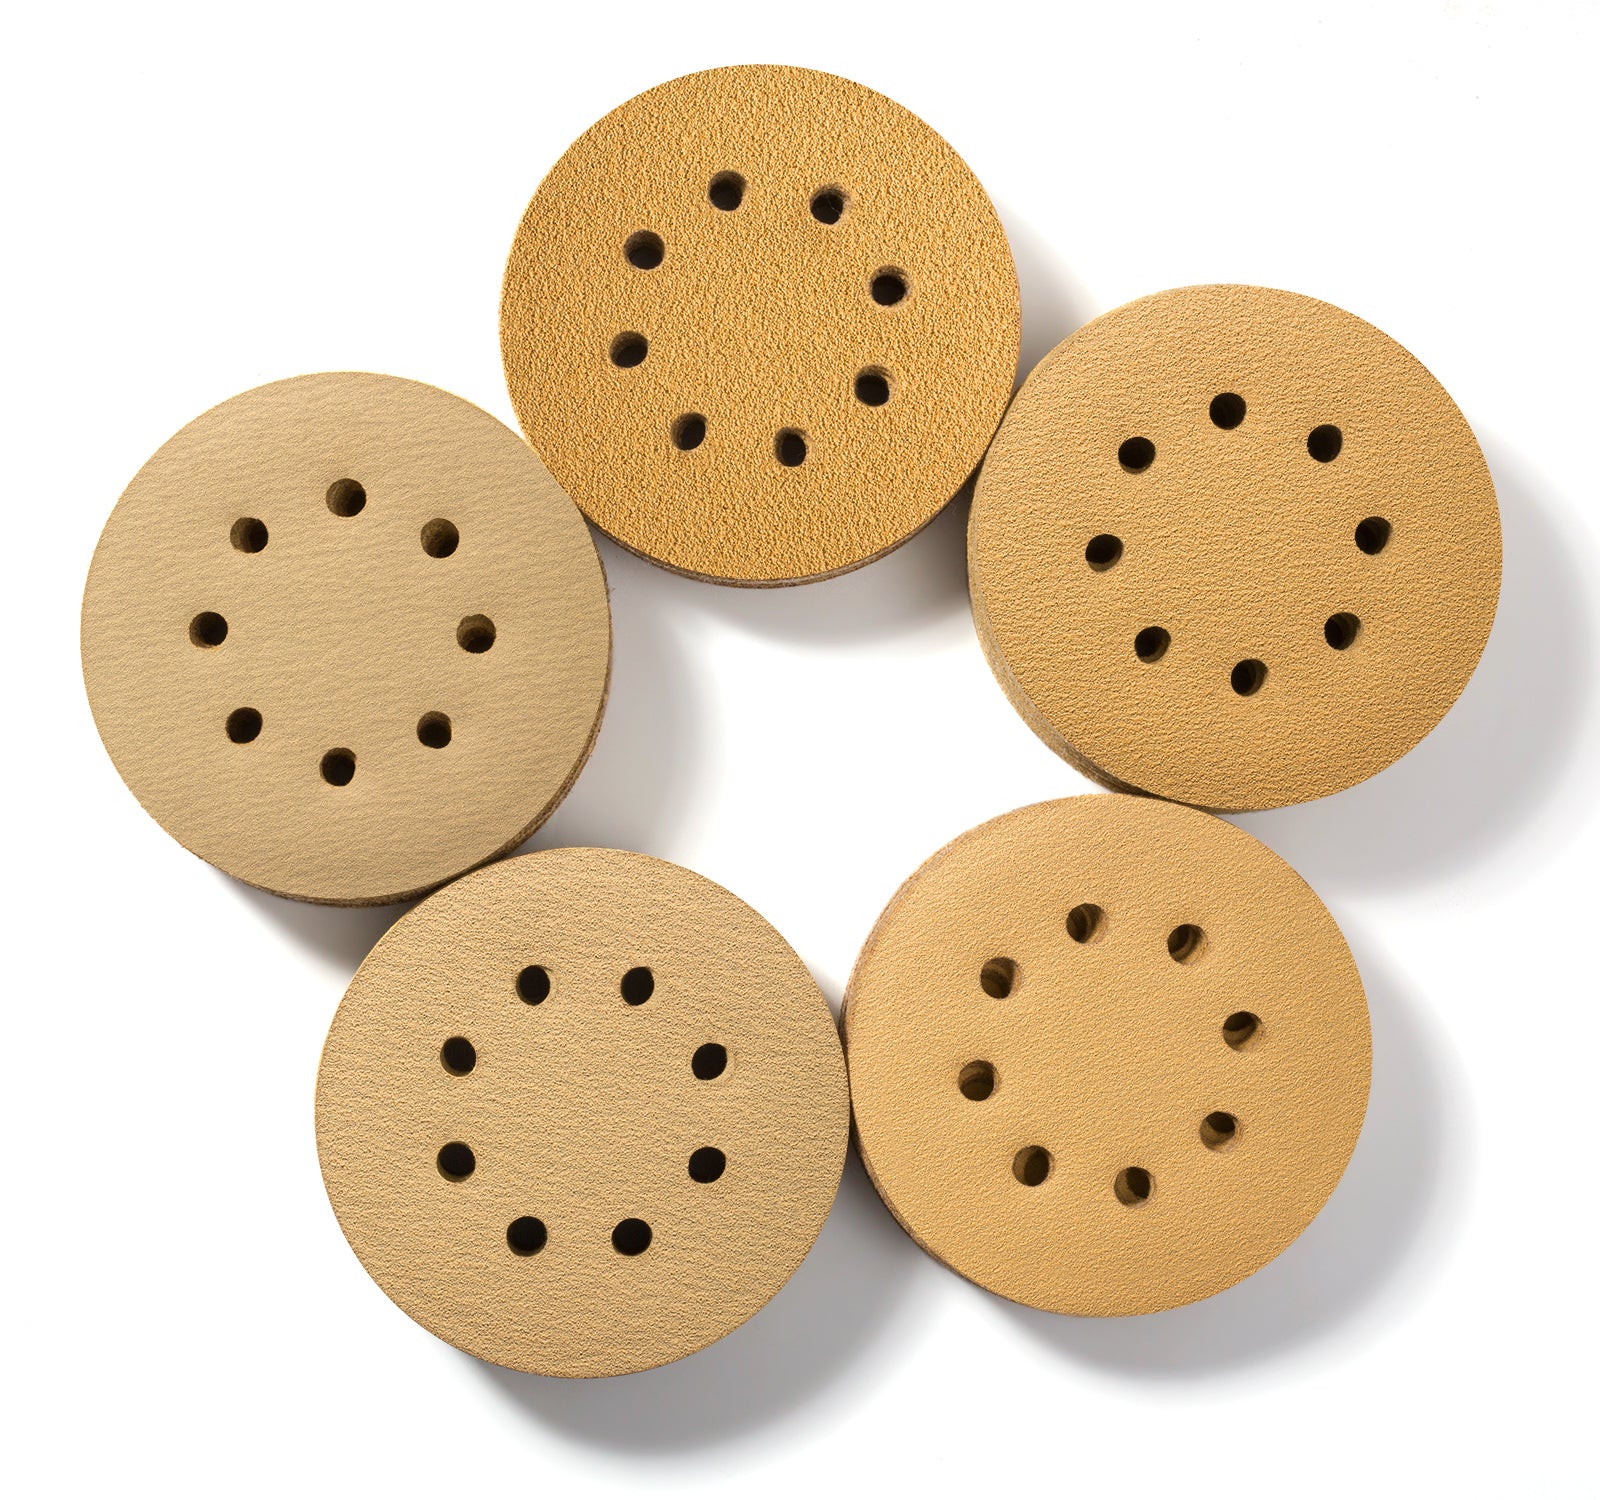 60 Grit Sanding Pads For Black And Decker Mouse Sanders, 12 Holes